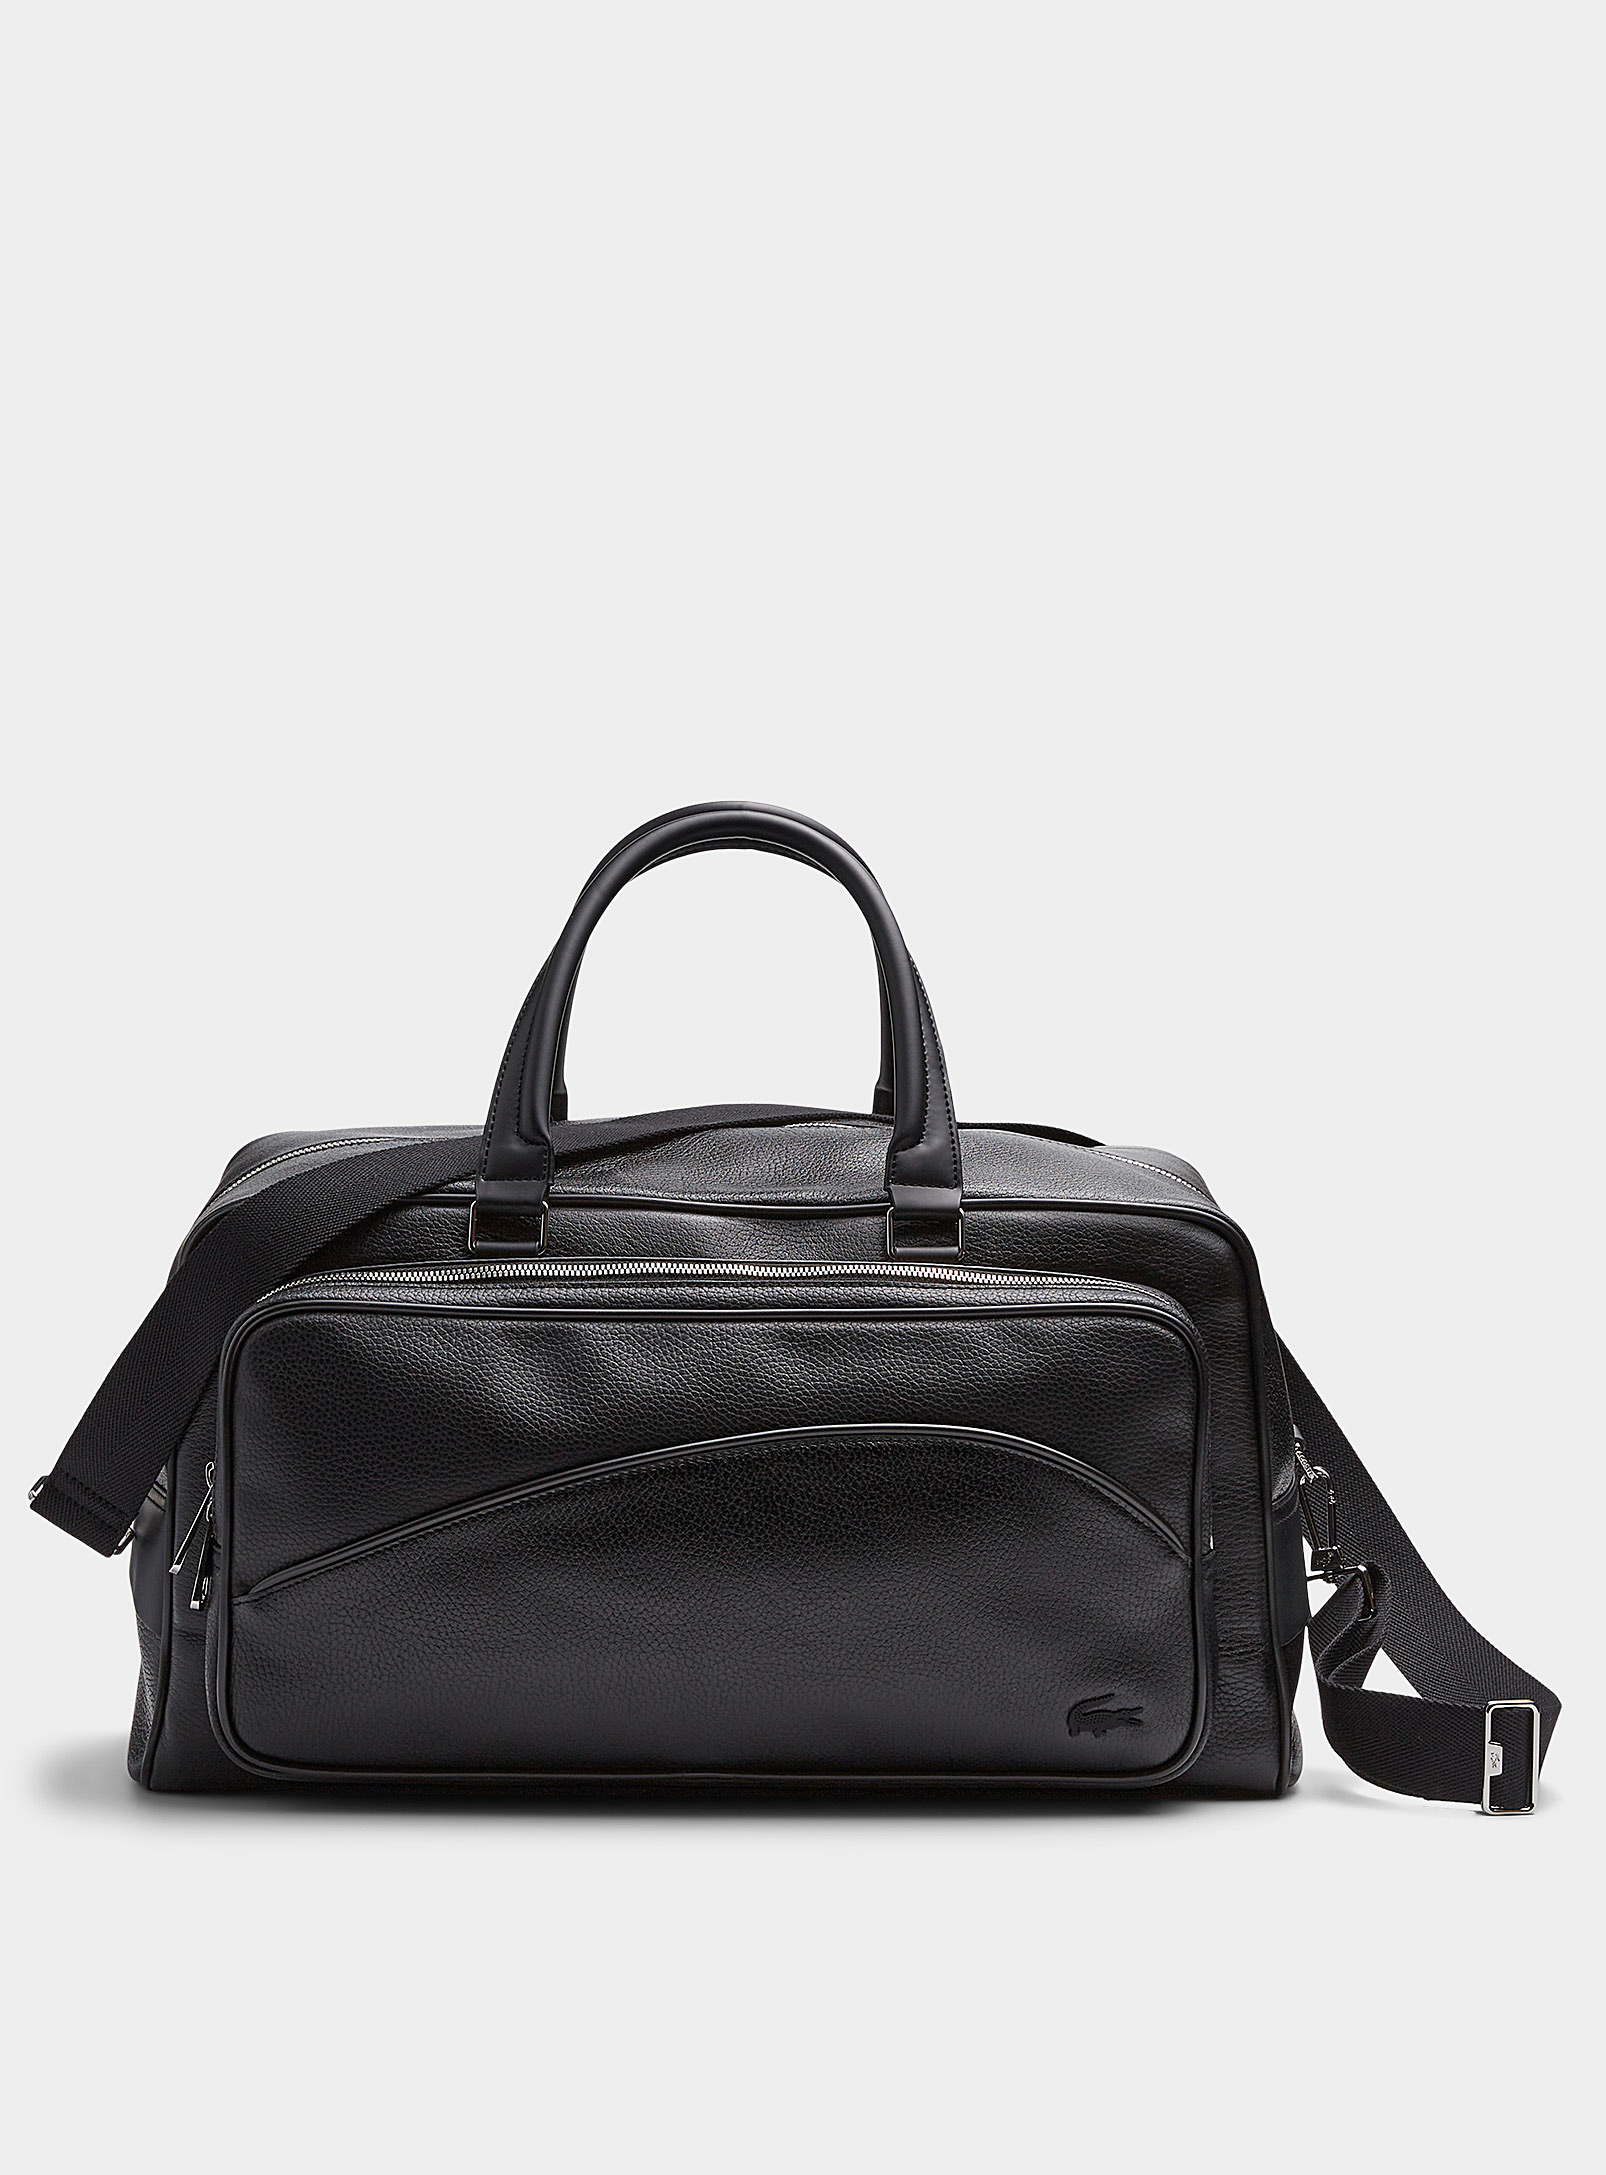 Lacoste Angy Weekend Bag In Black